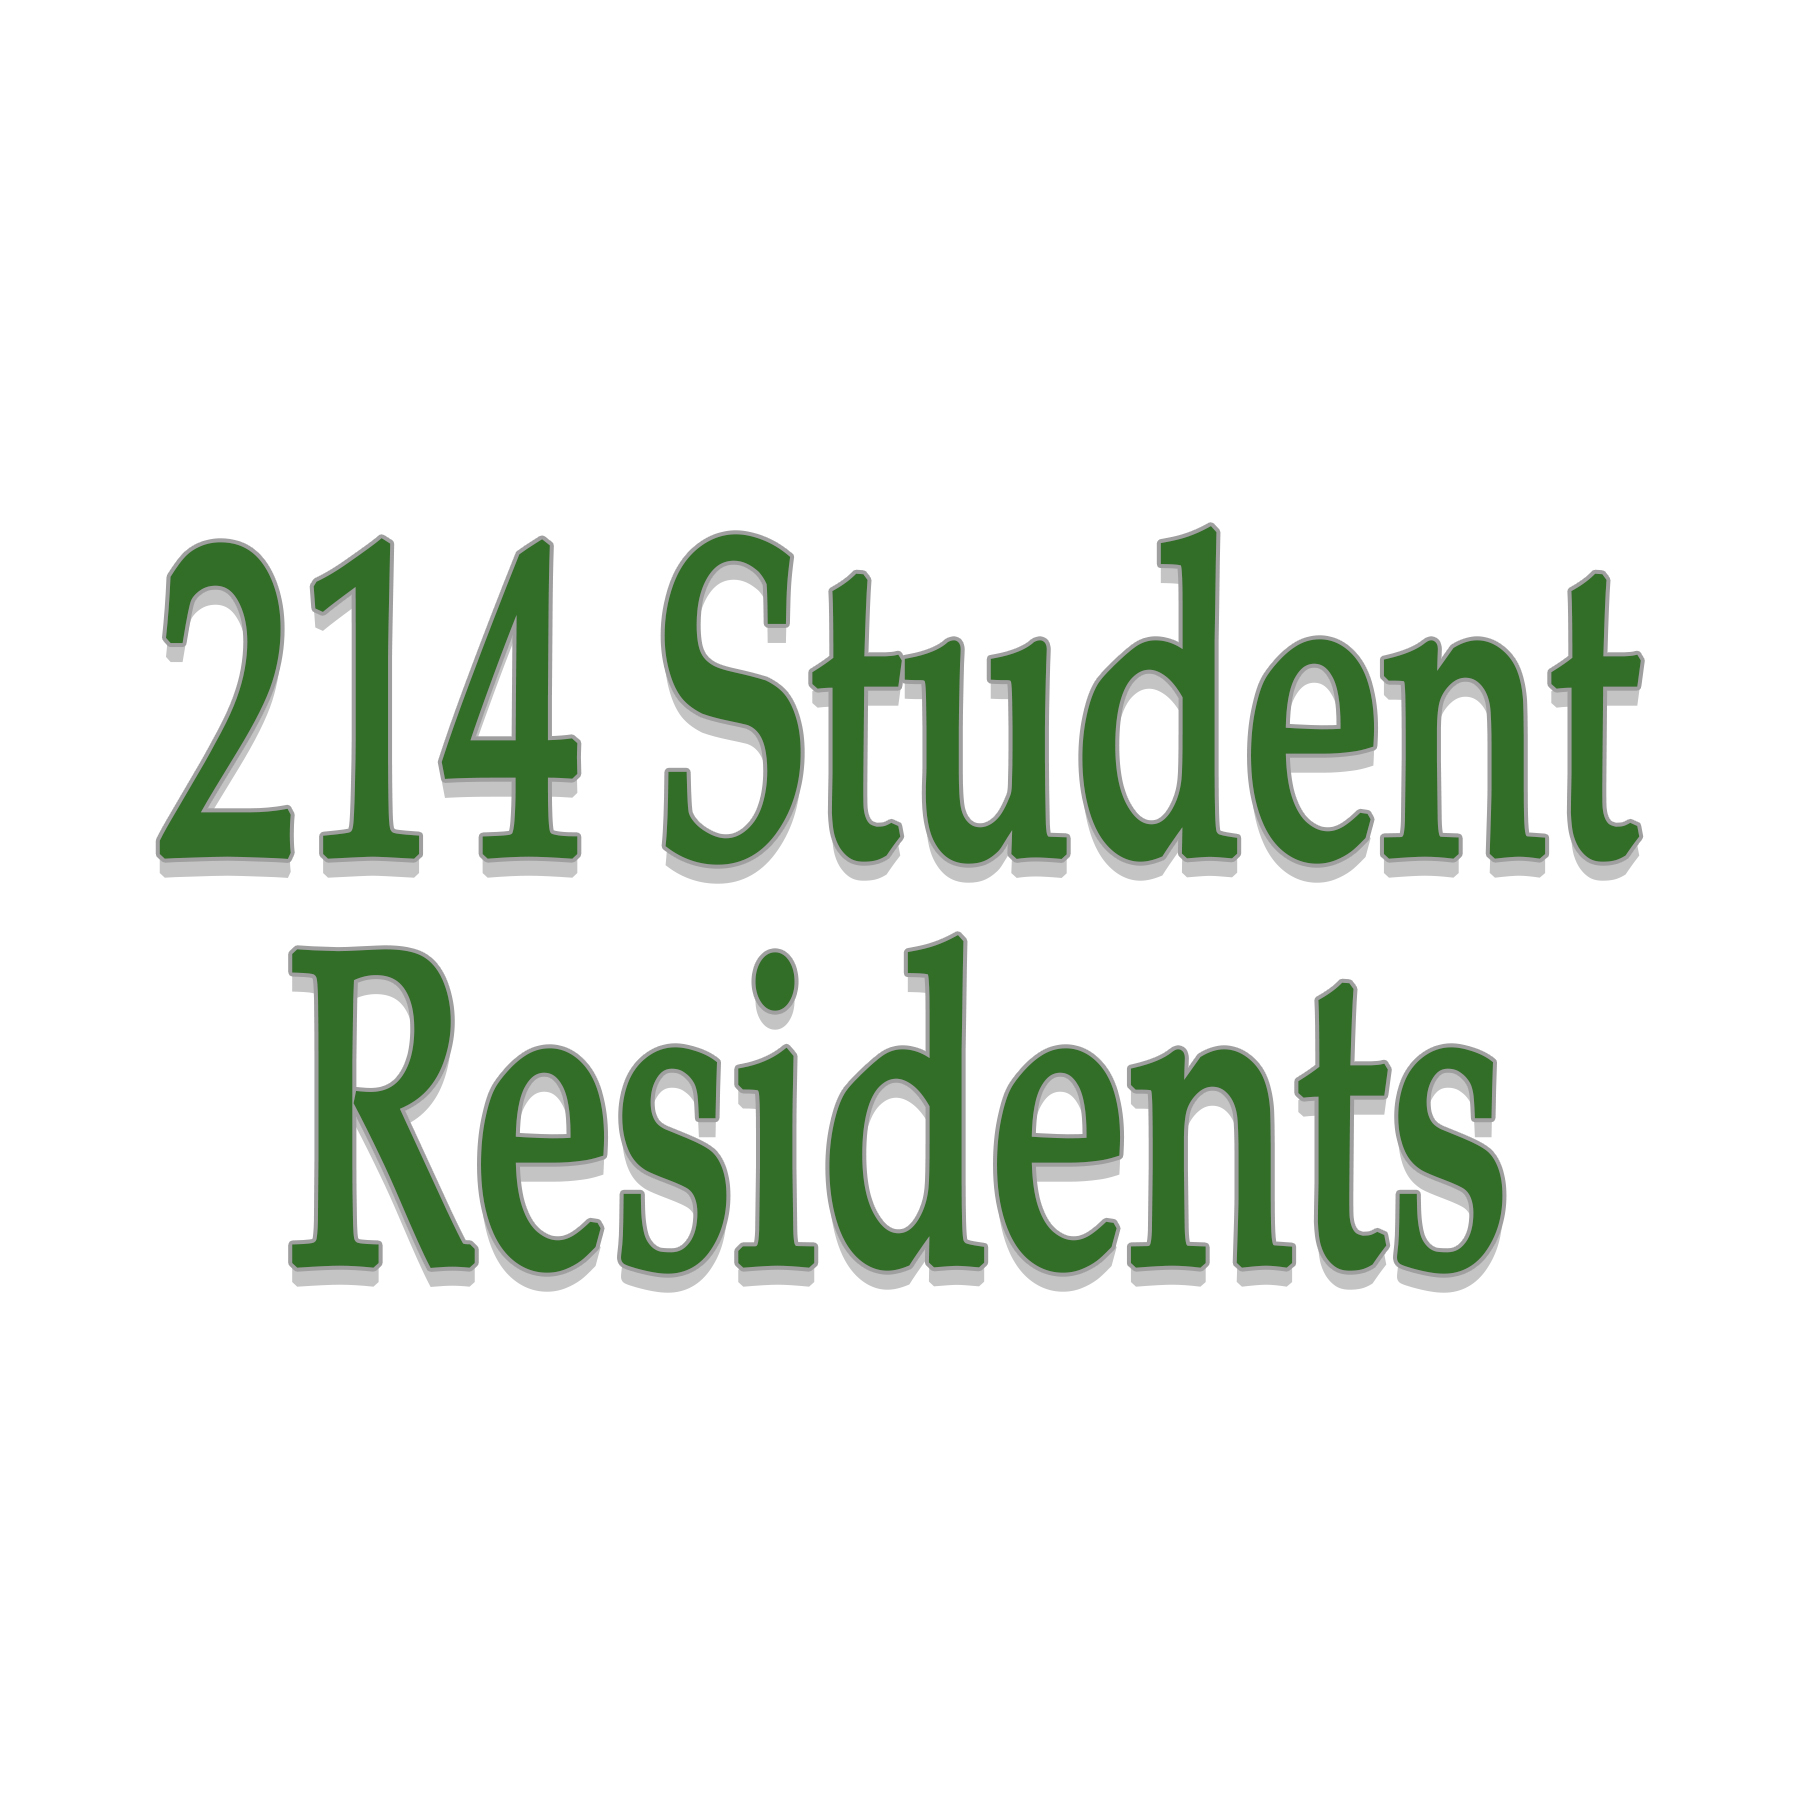 214 Student Residents